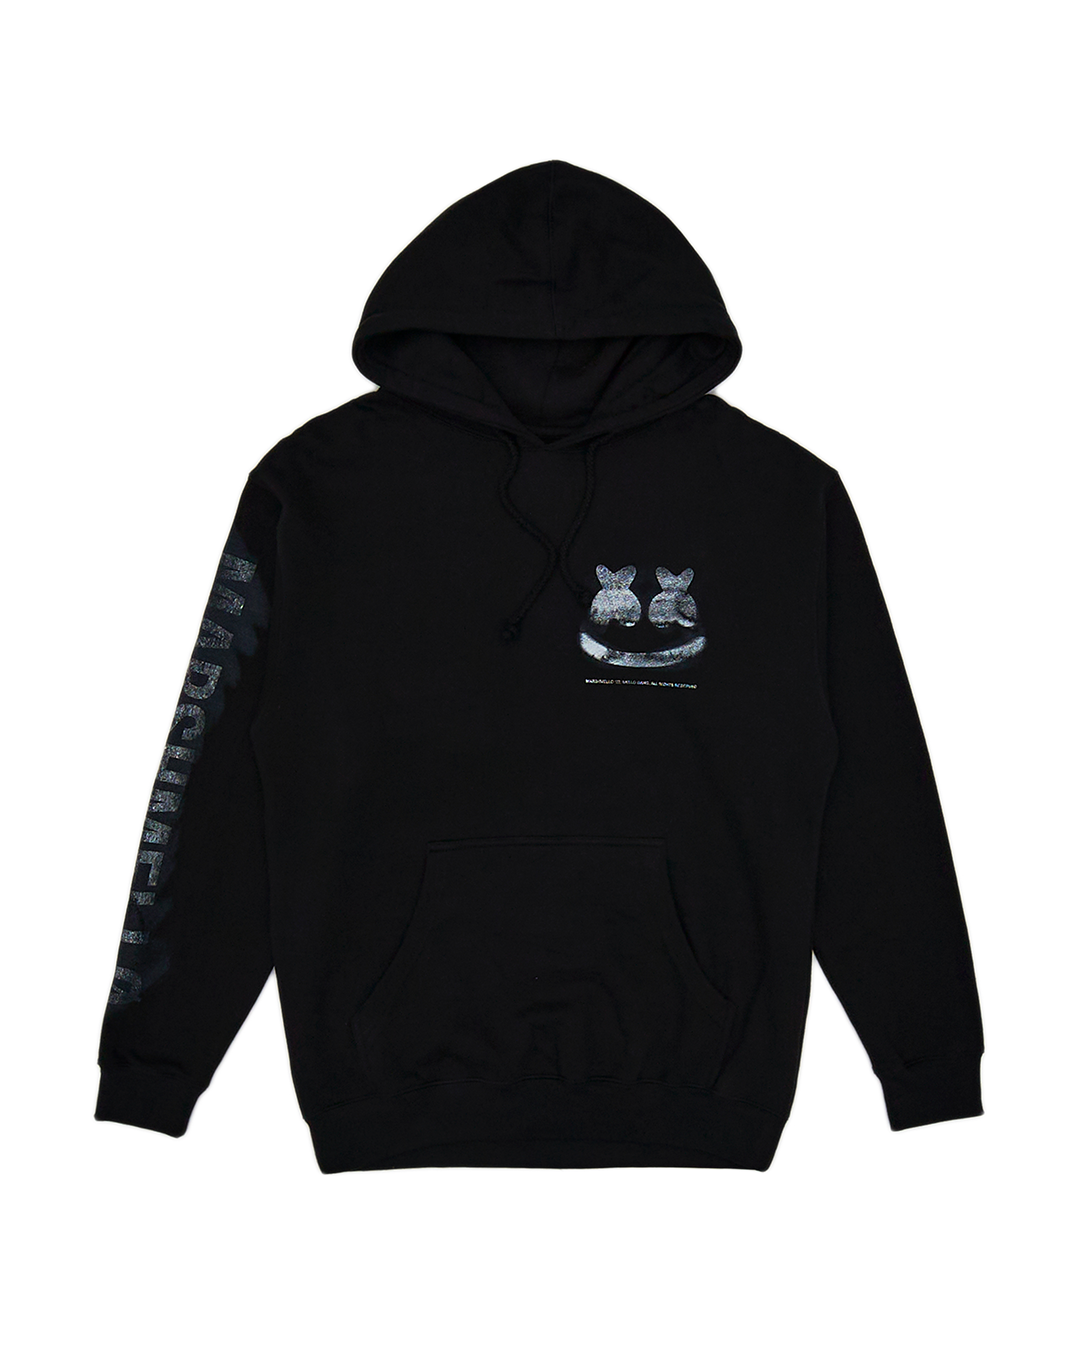 Marshmello Out of Focus Hoodie